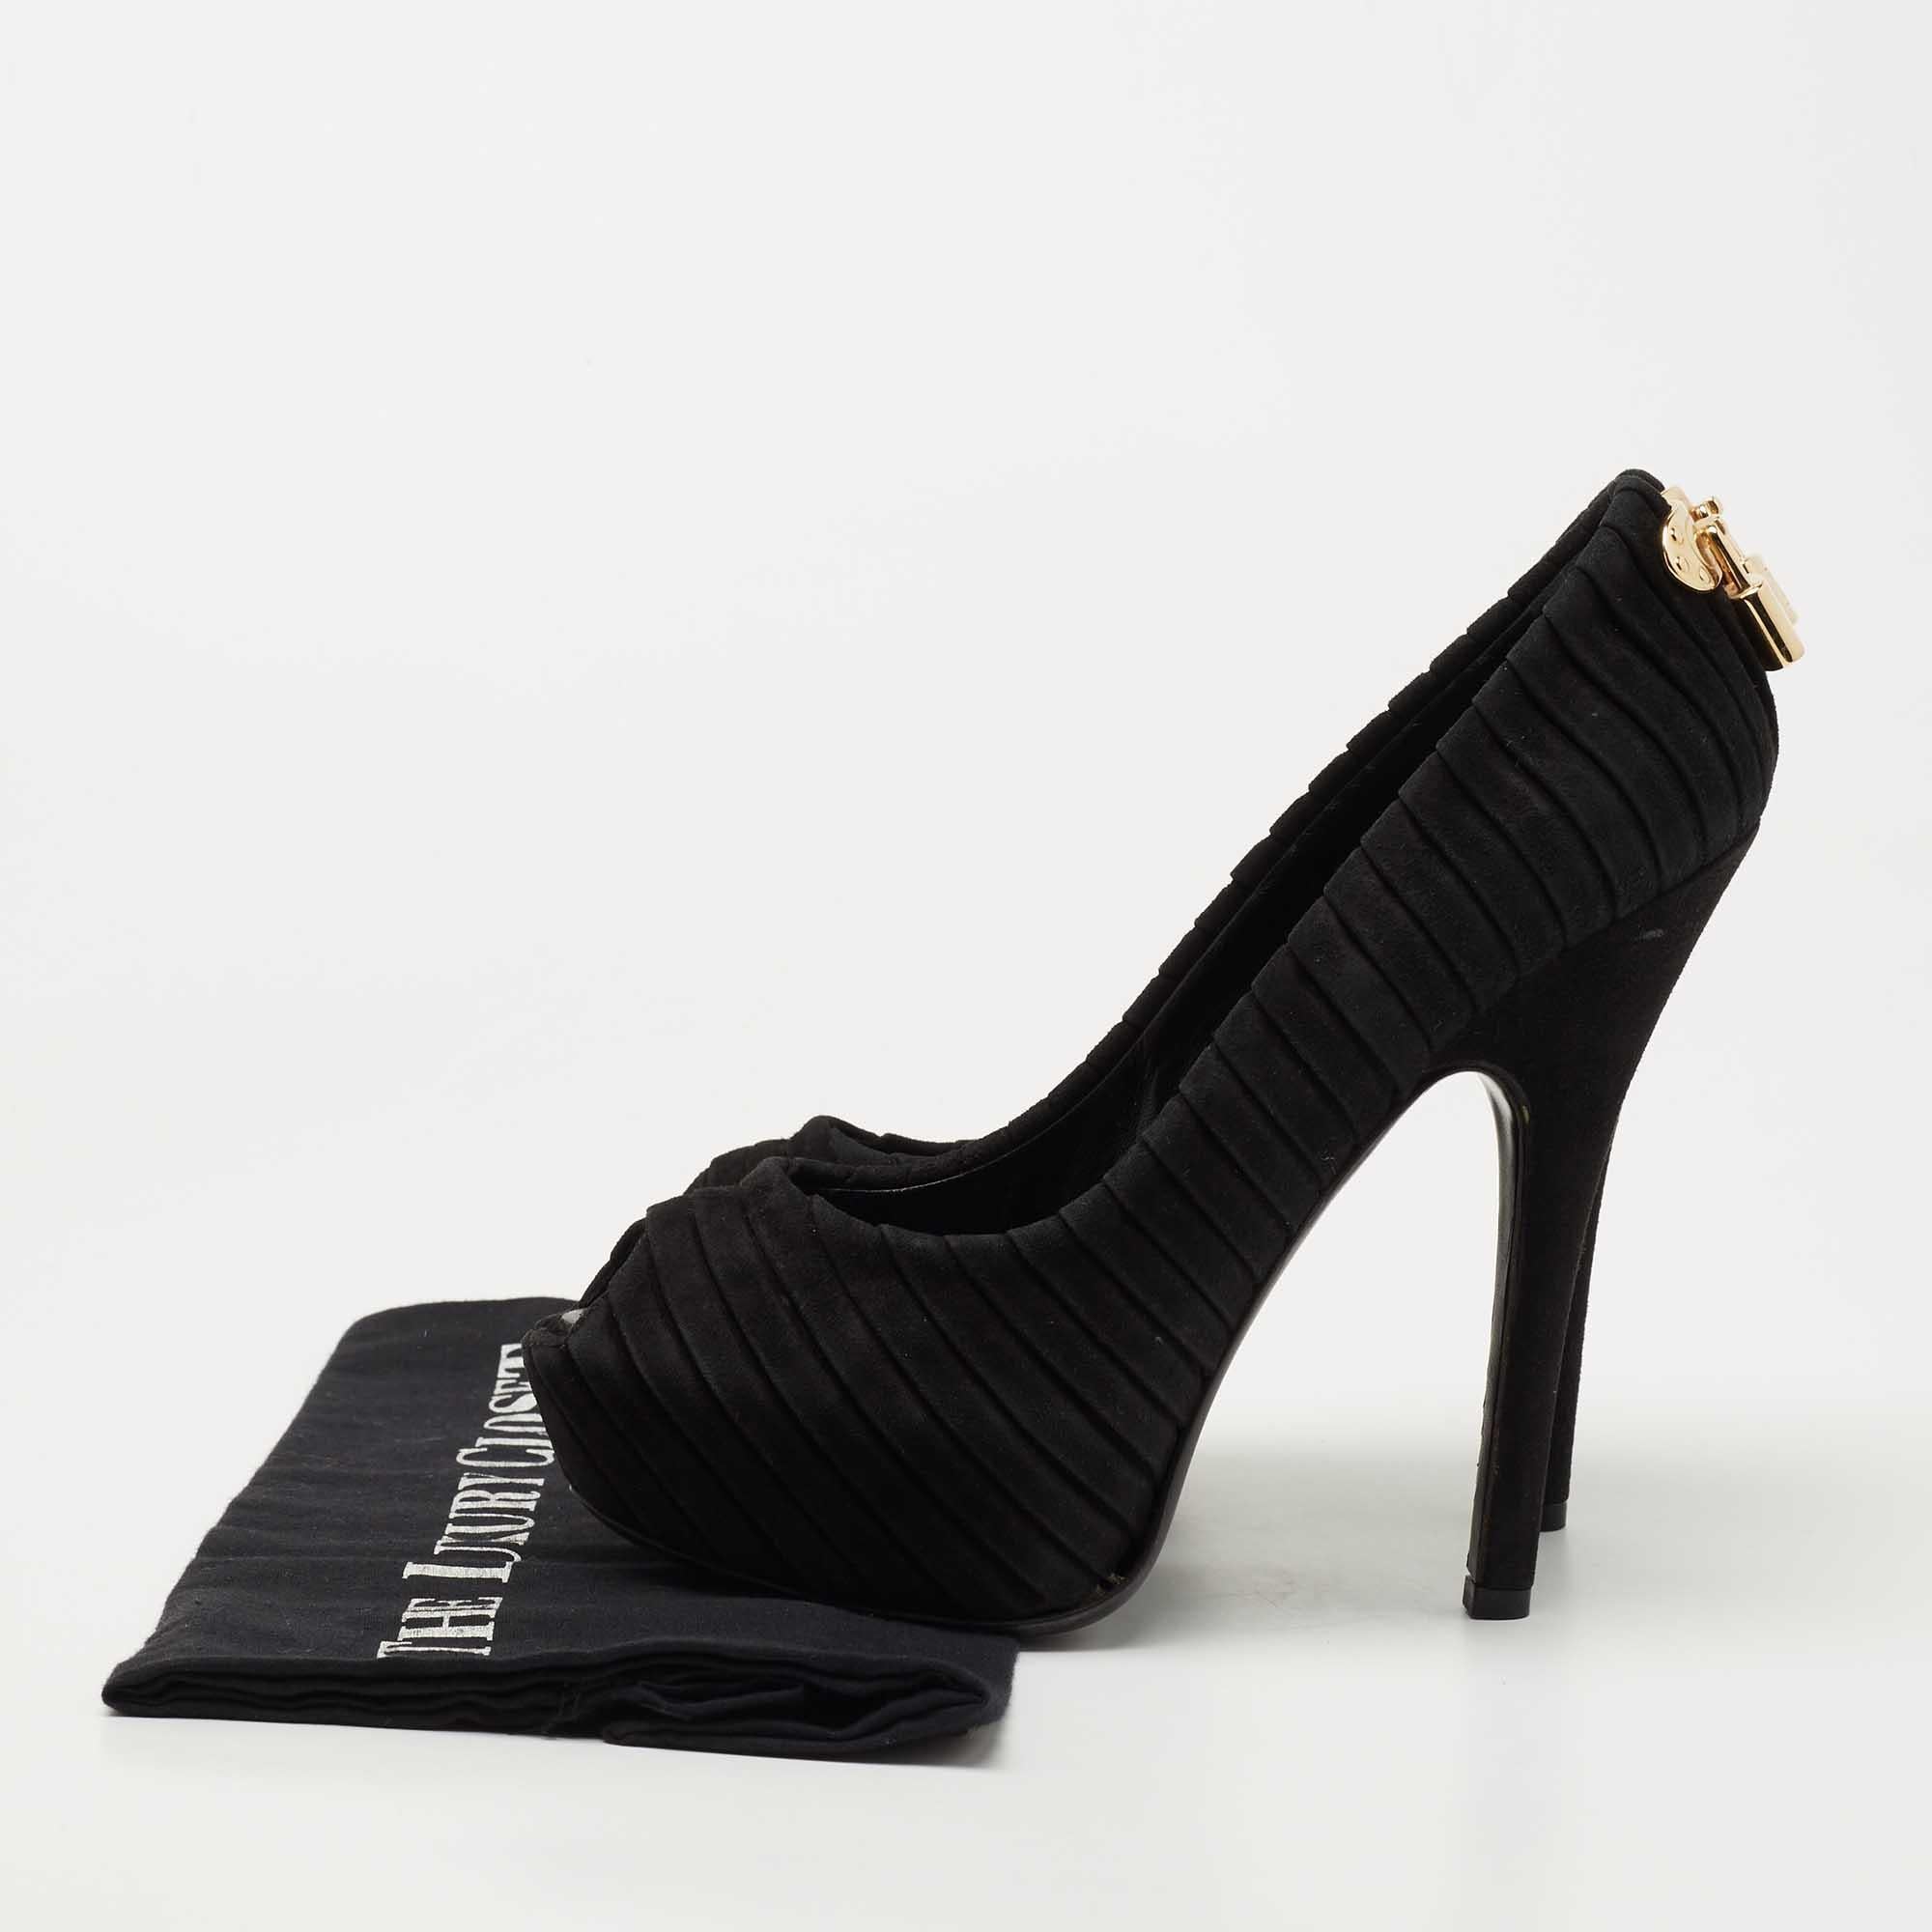 Louis Vuitton Black Pleated Suede Oh Really! Peep Toe Pumps Size 36.5 5